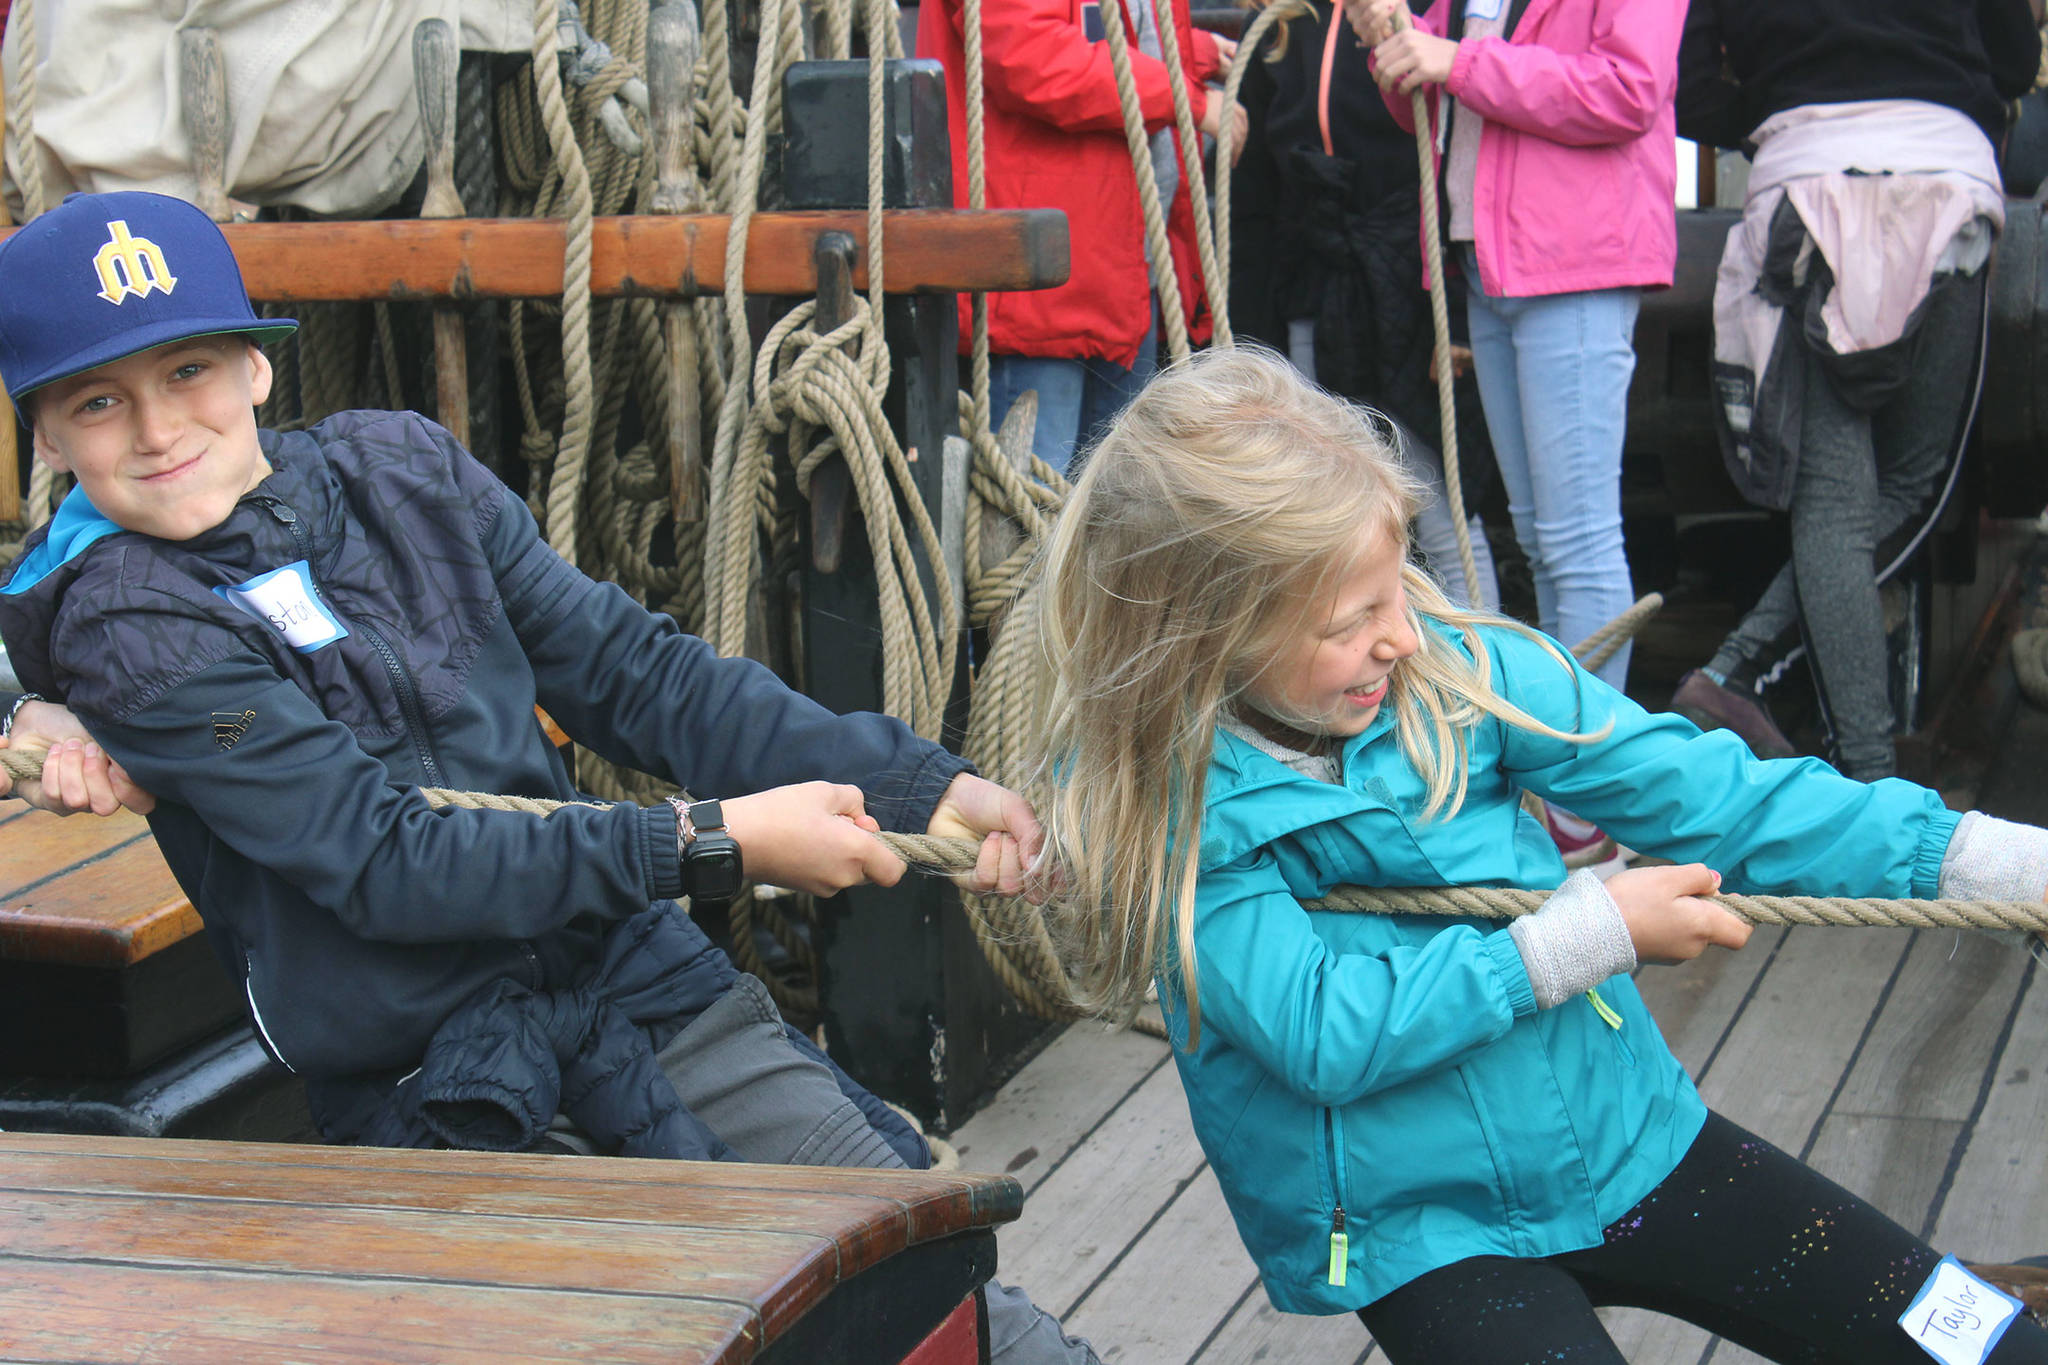 South Whidbey Elementary School students Weston Dill, right, and Taylor Jones, left, pull ropes aboard the Lady Washington historic “tall ship” in Langley harbor on Thursday. Photo by Wendy Leigh/South Whidbey Record